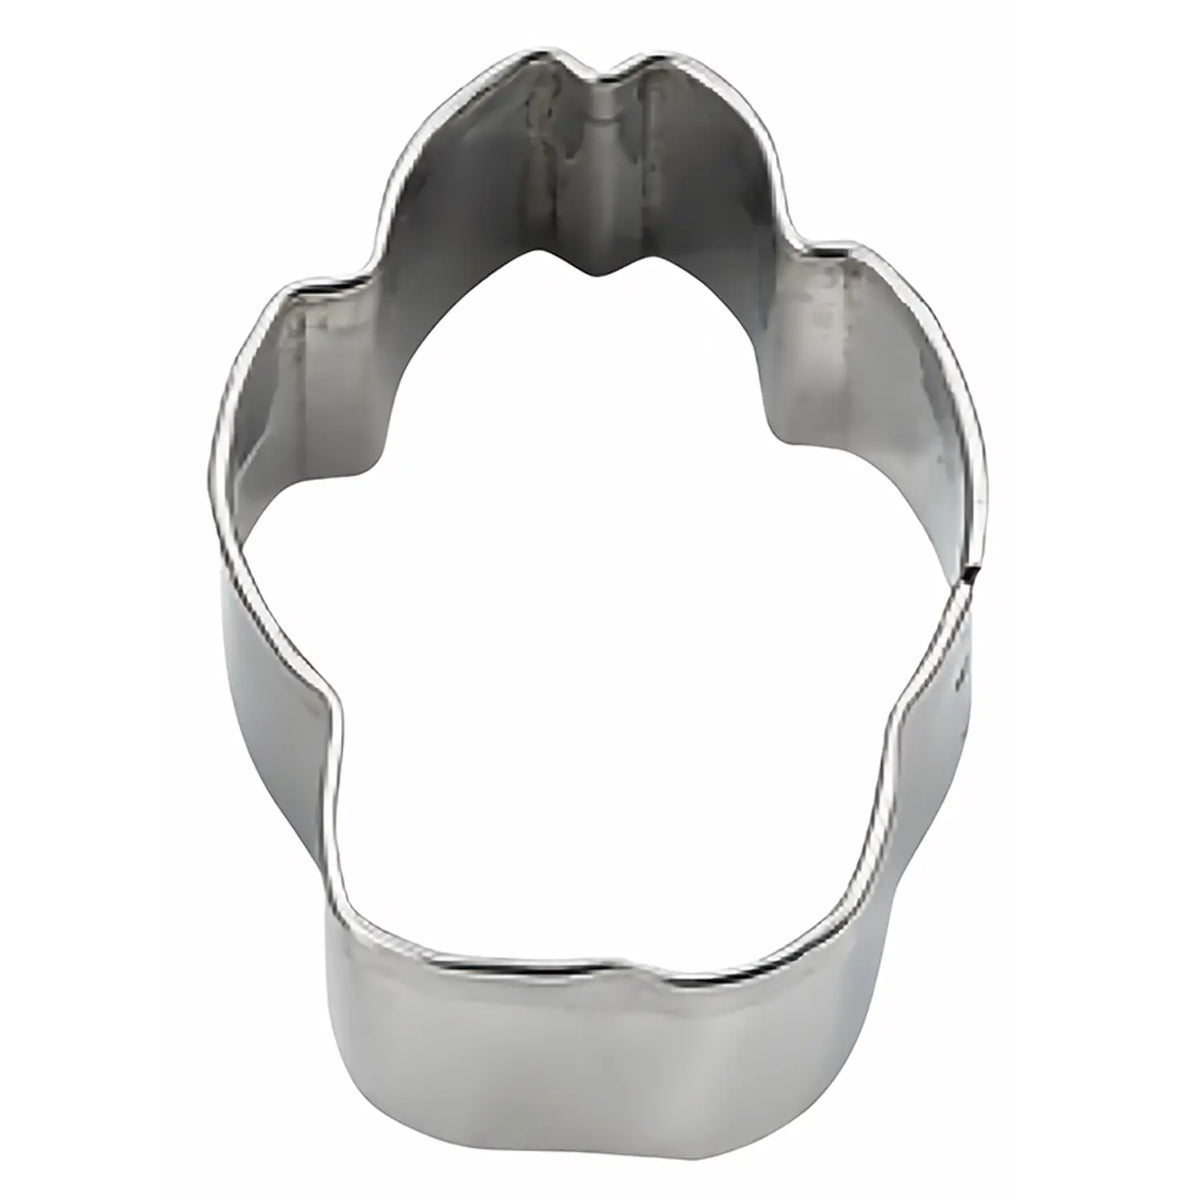 TIGERCROWN Cake Land Stainless Steel Cookie Cutter Paw